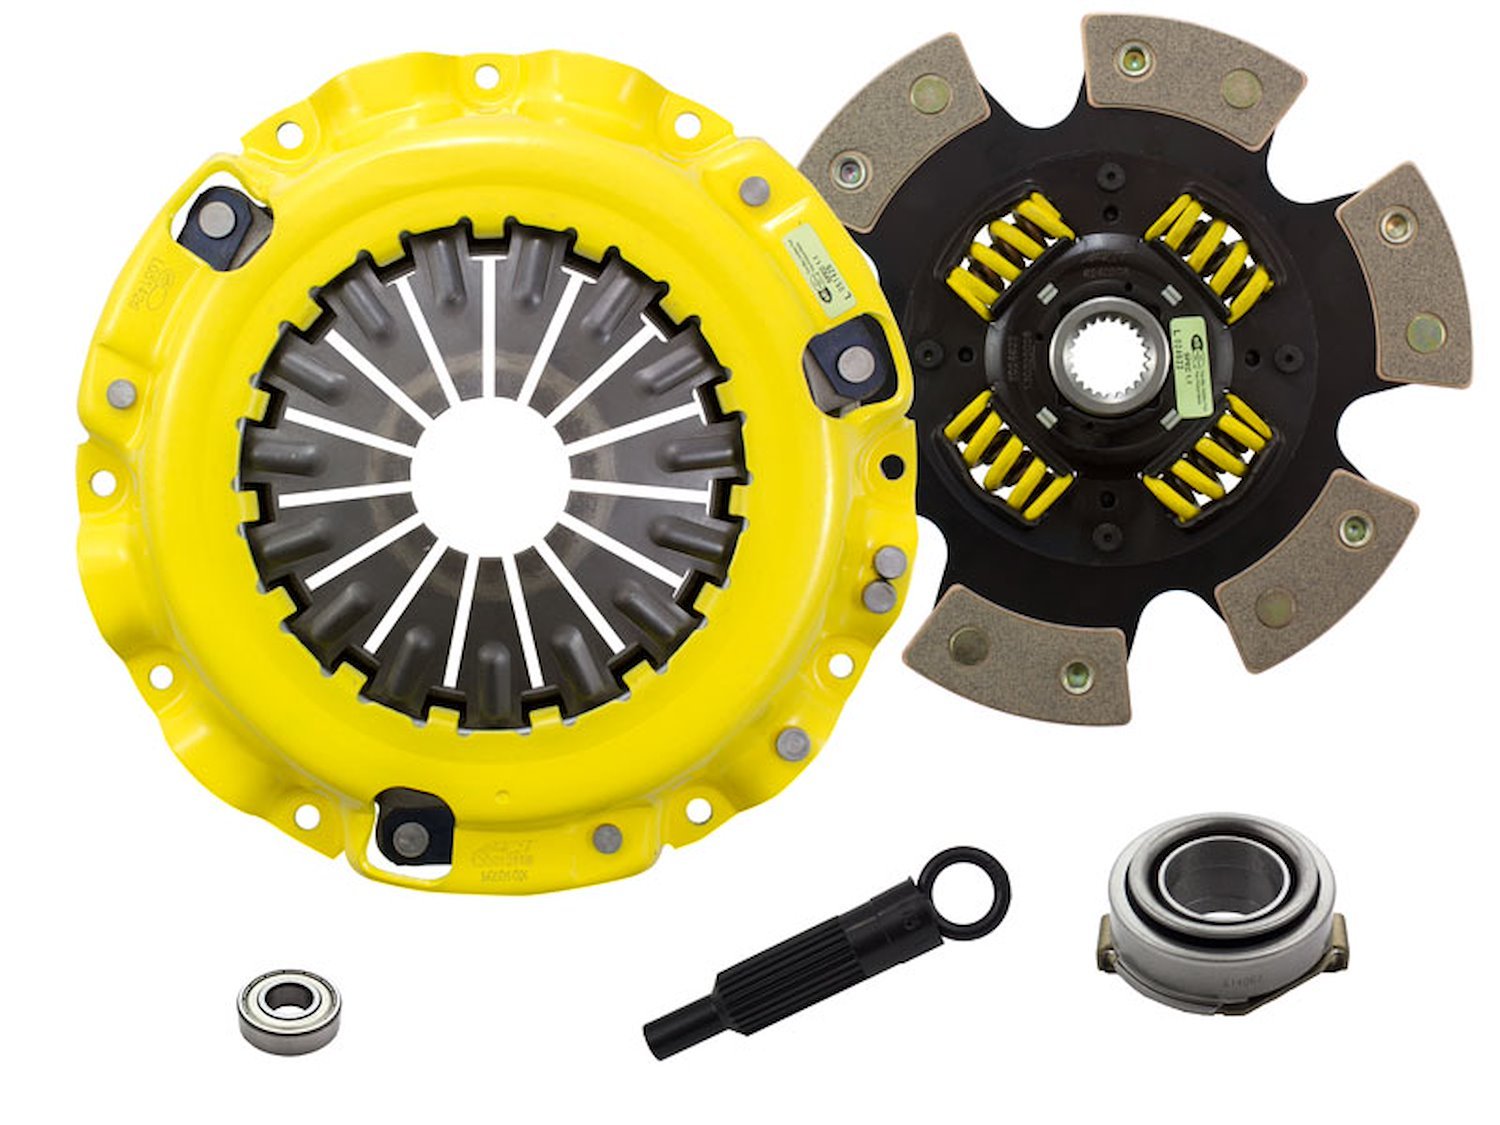 XT/Race Sprung 6-Pad Transmission Clutch Kit Fits Select Ford/Lincoln/Mercury/Mazda